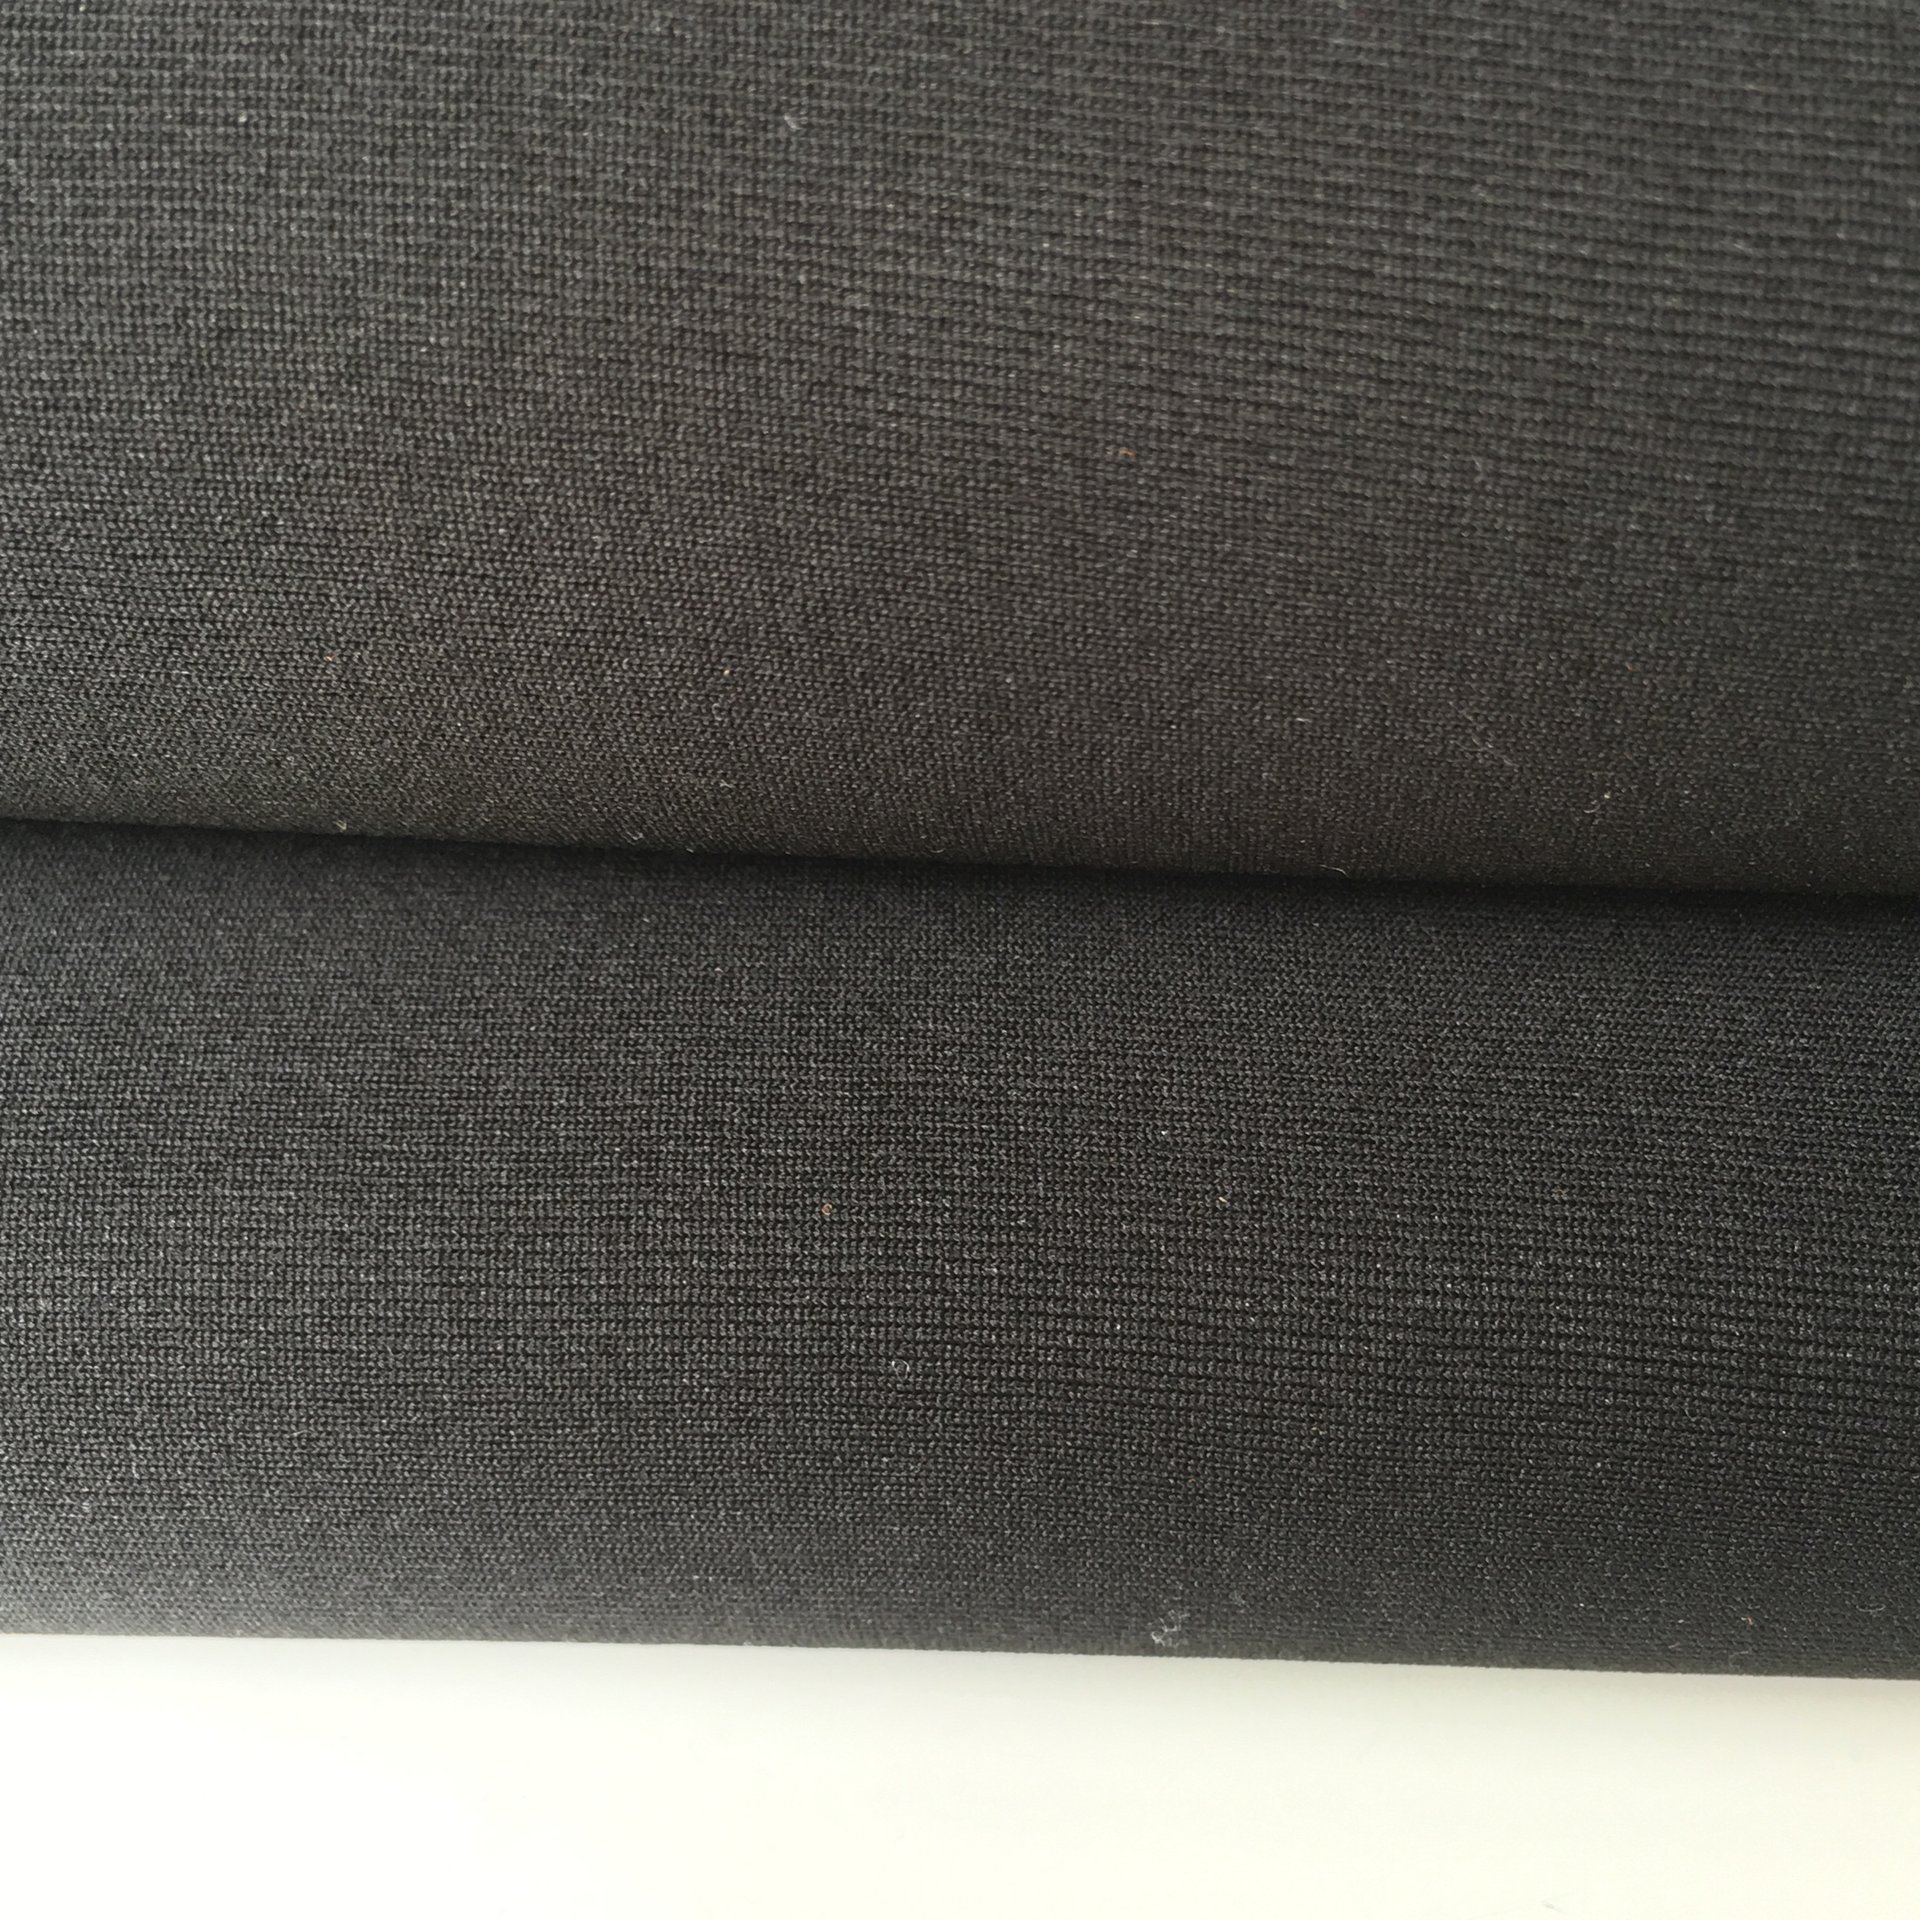 CR polyester diving fabric